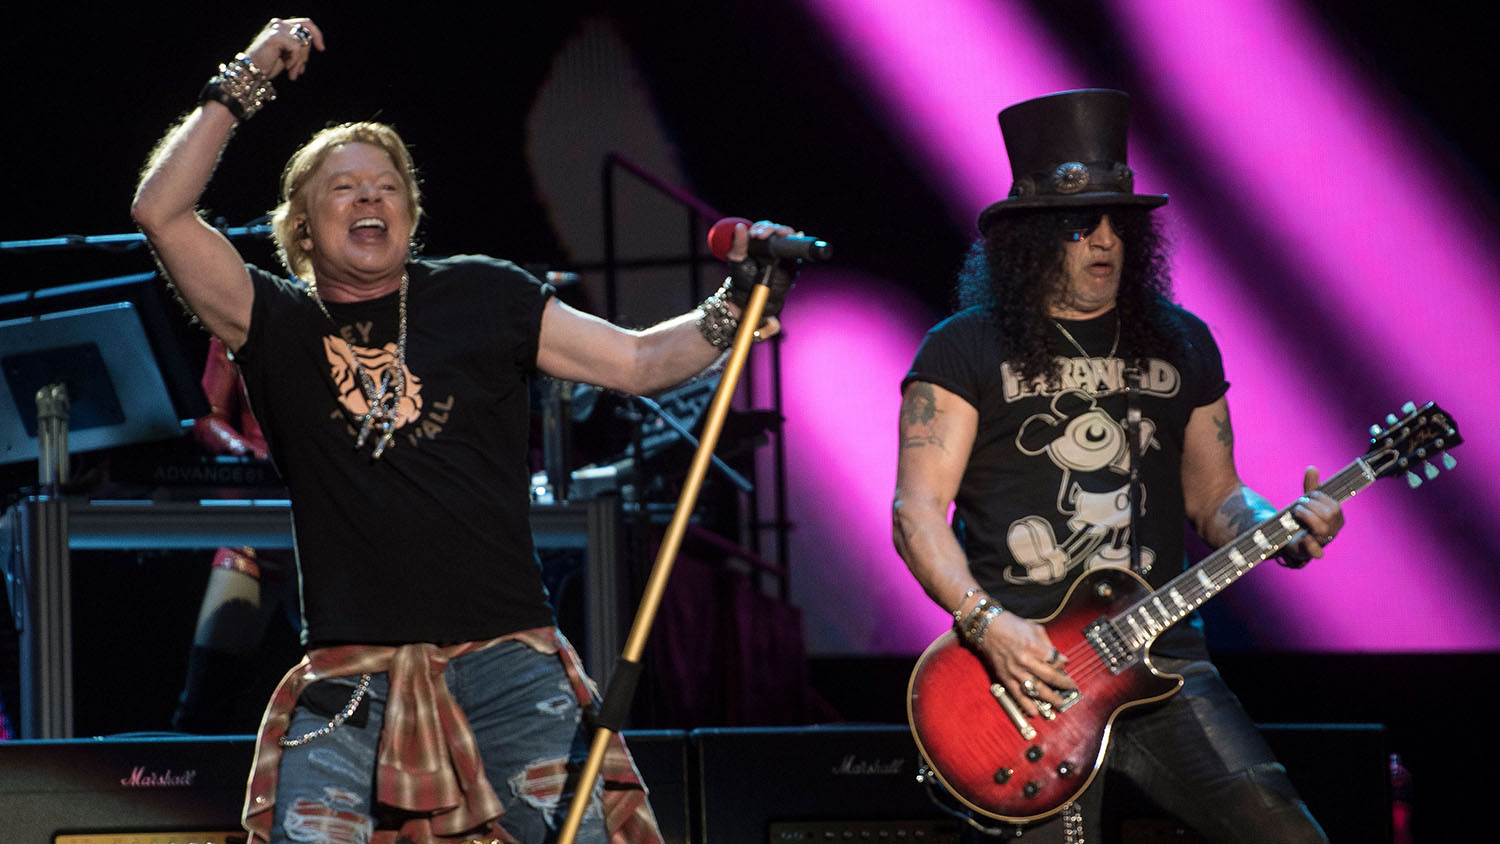 Guns N' Roses - Welcome To The Jungle! Australasian Tour